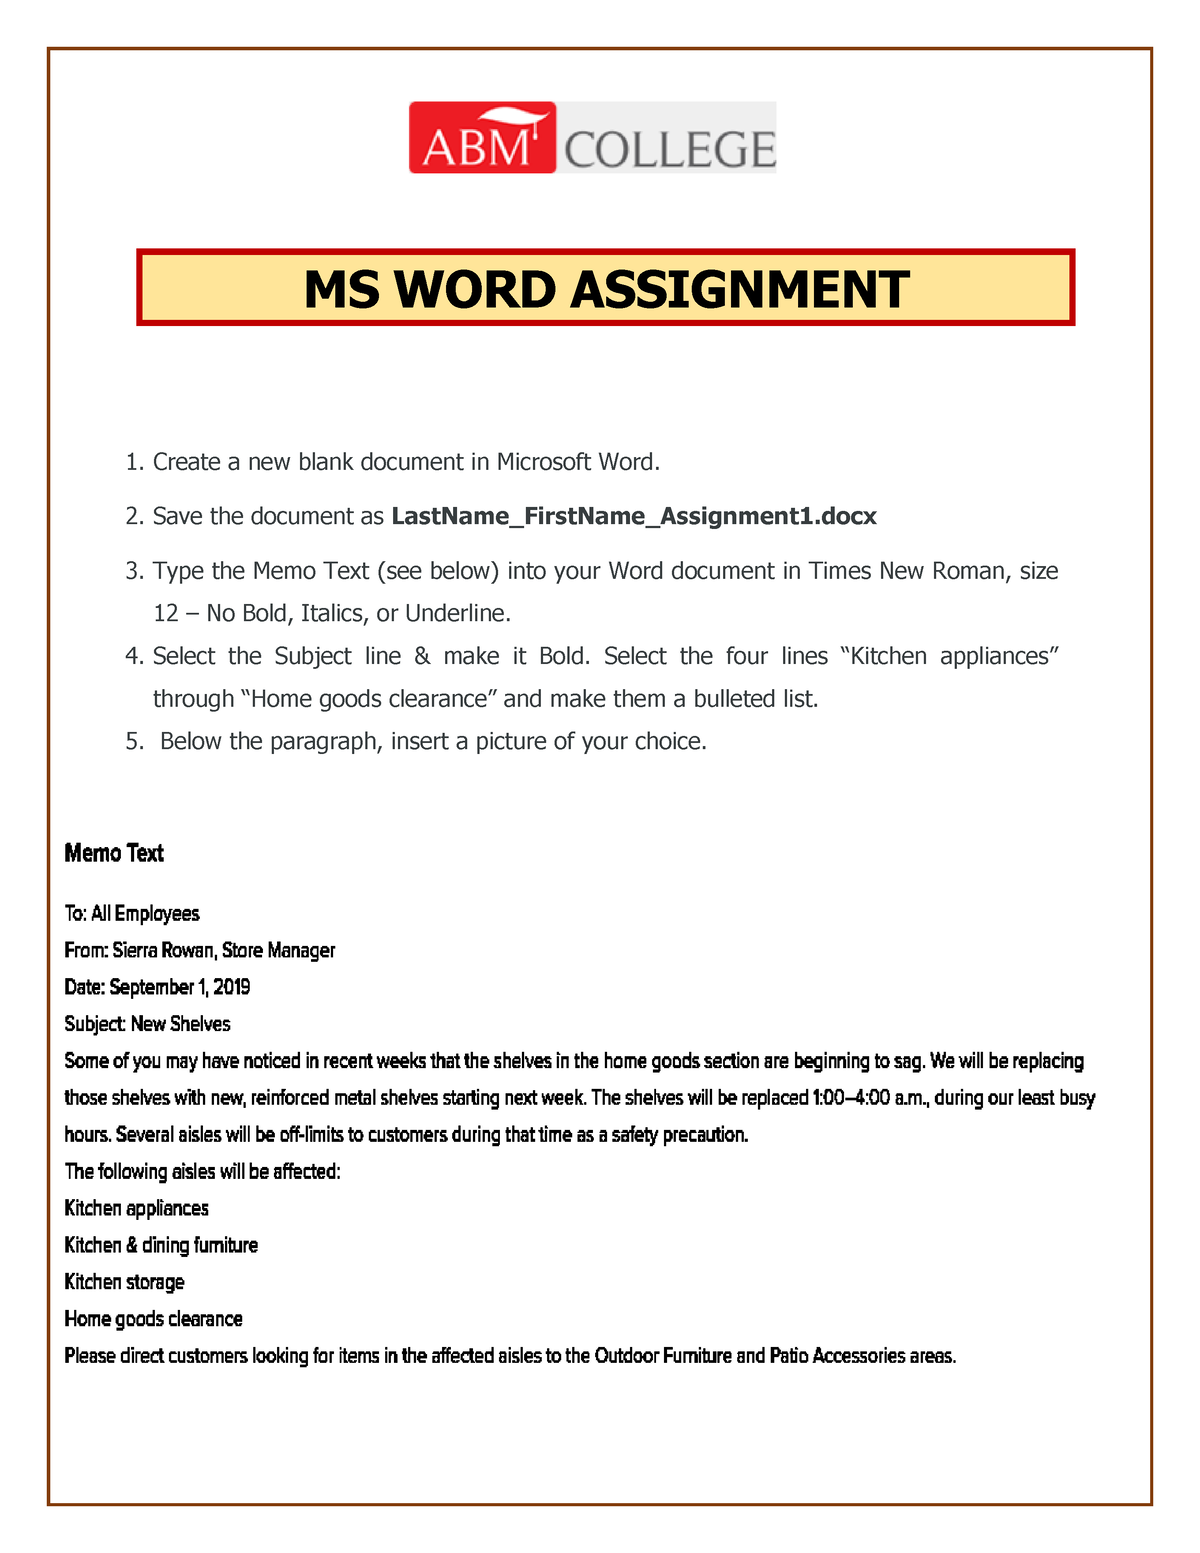 ms word new assignment